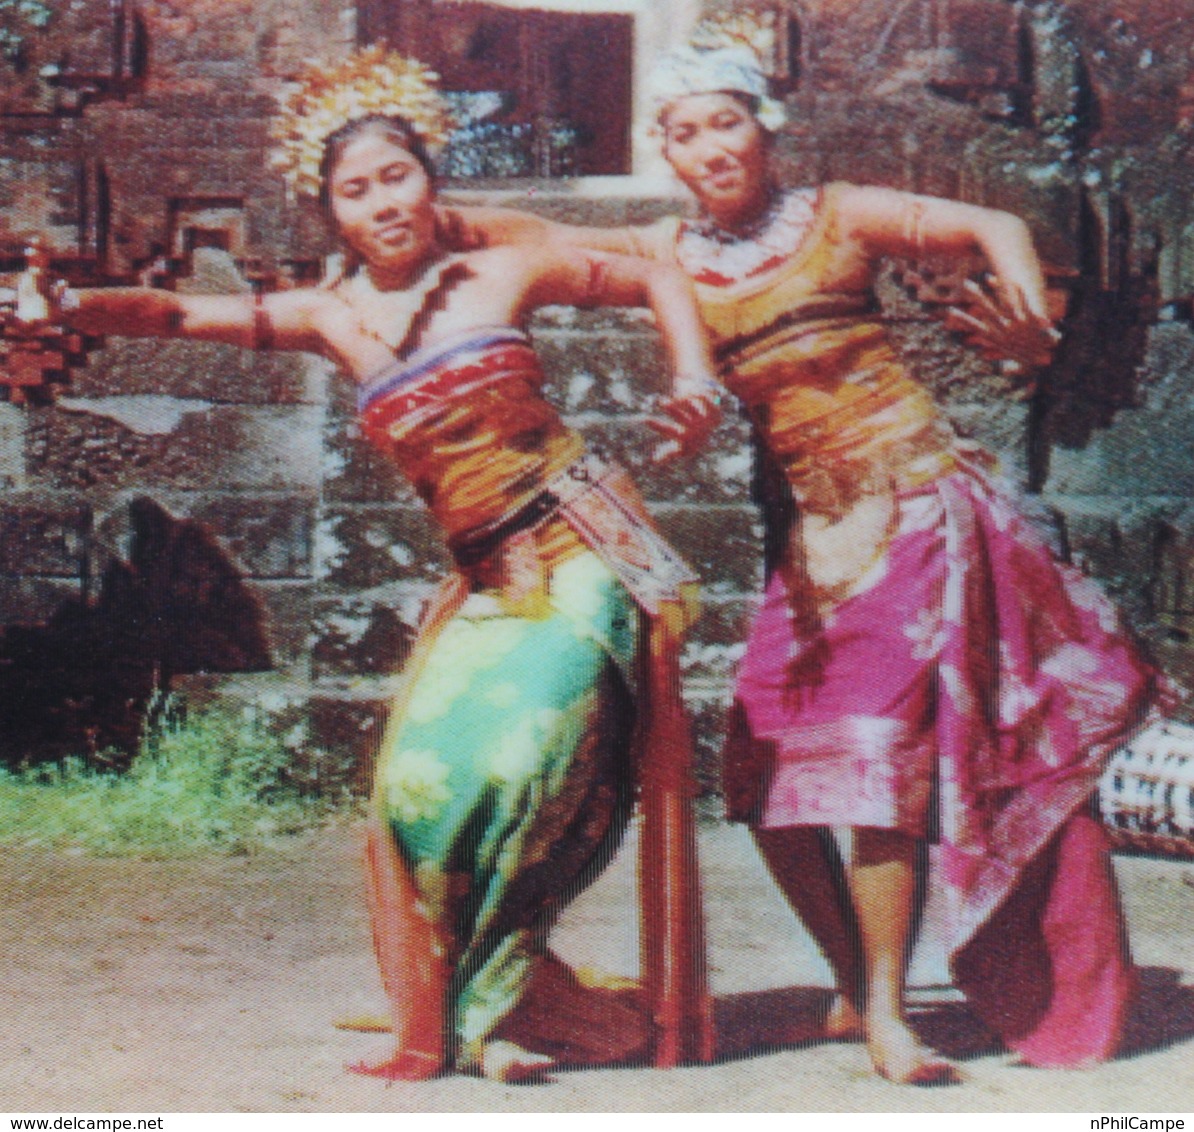 #9-INDONESIA POSTCARD 1970s 3D CARD(TOP STEREO), THE PENDET DANCE, BALI - Indonesia